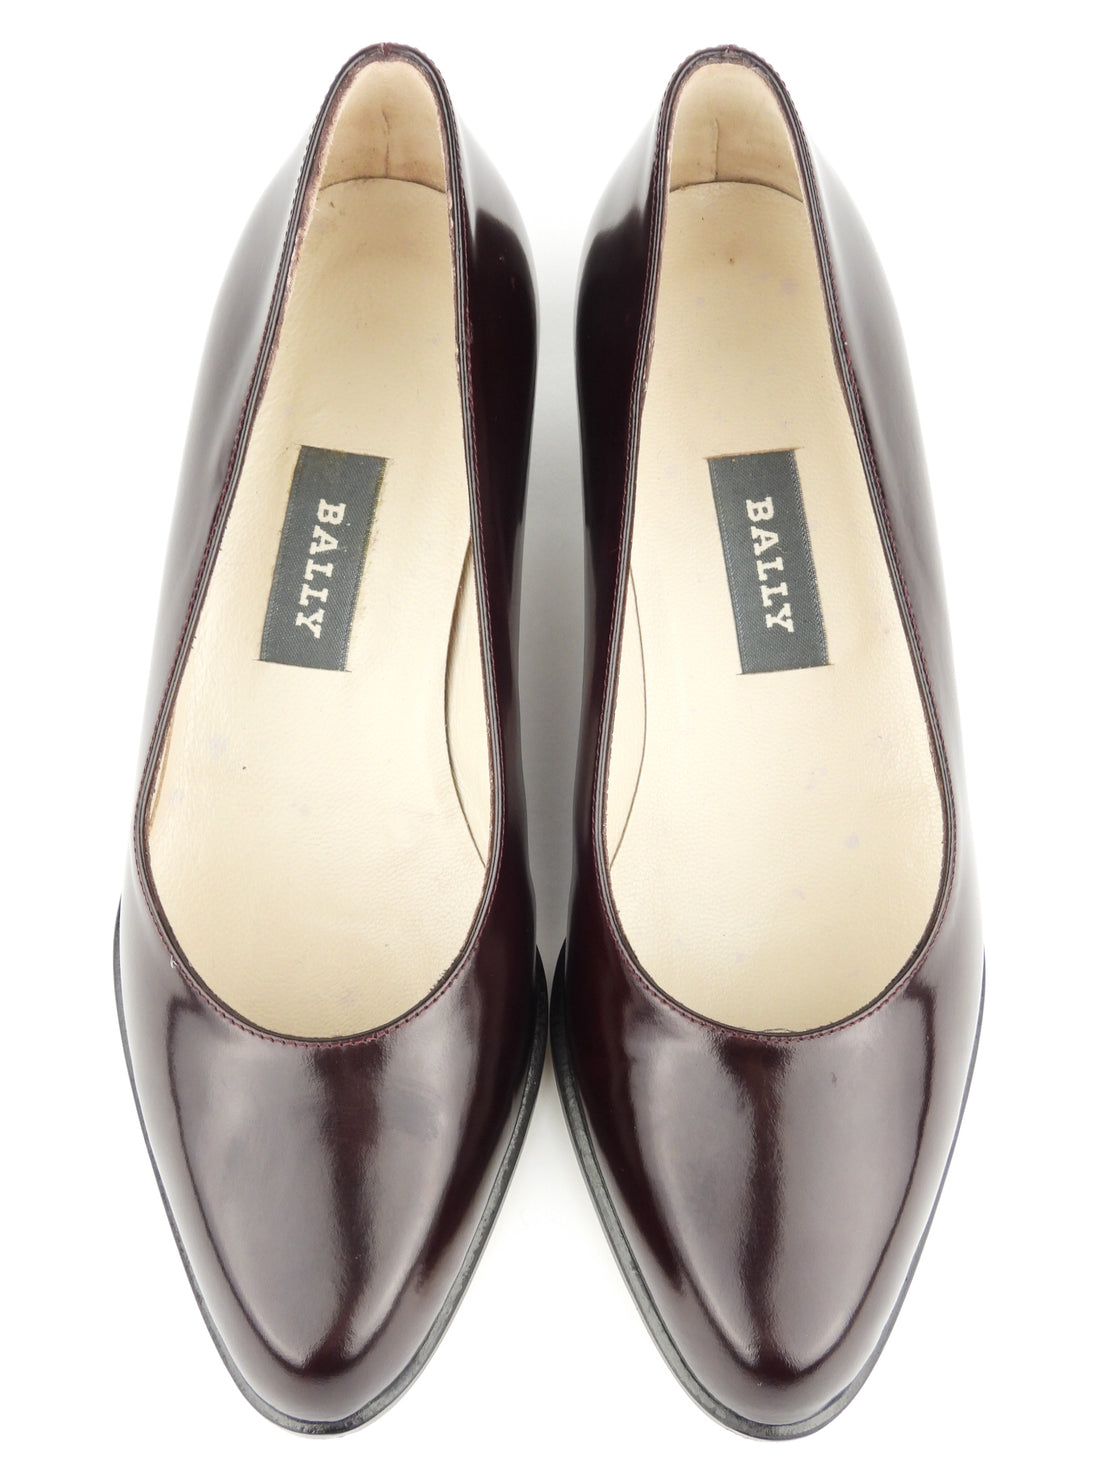 Bally Dark Brown Shiny Leather Block Heel Court Shoes - 38